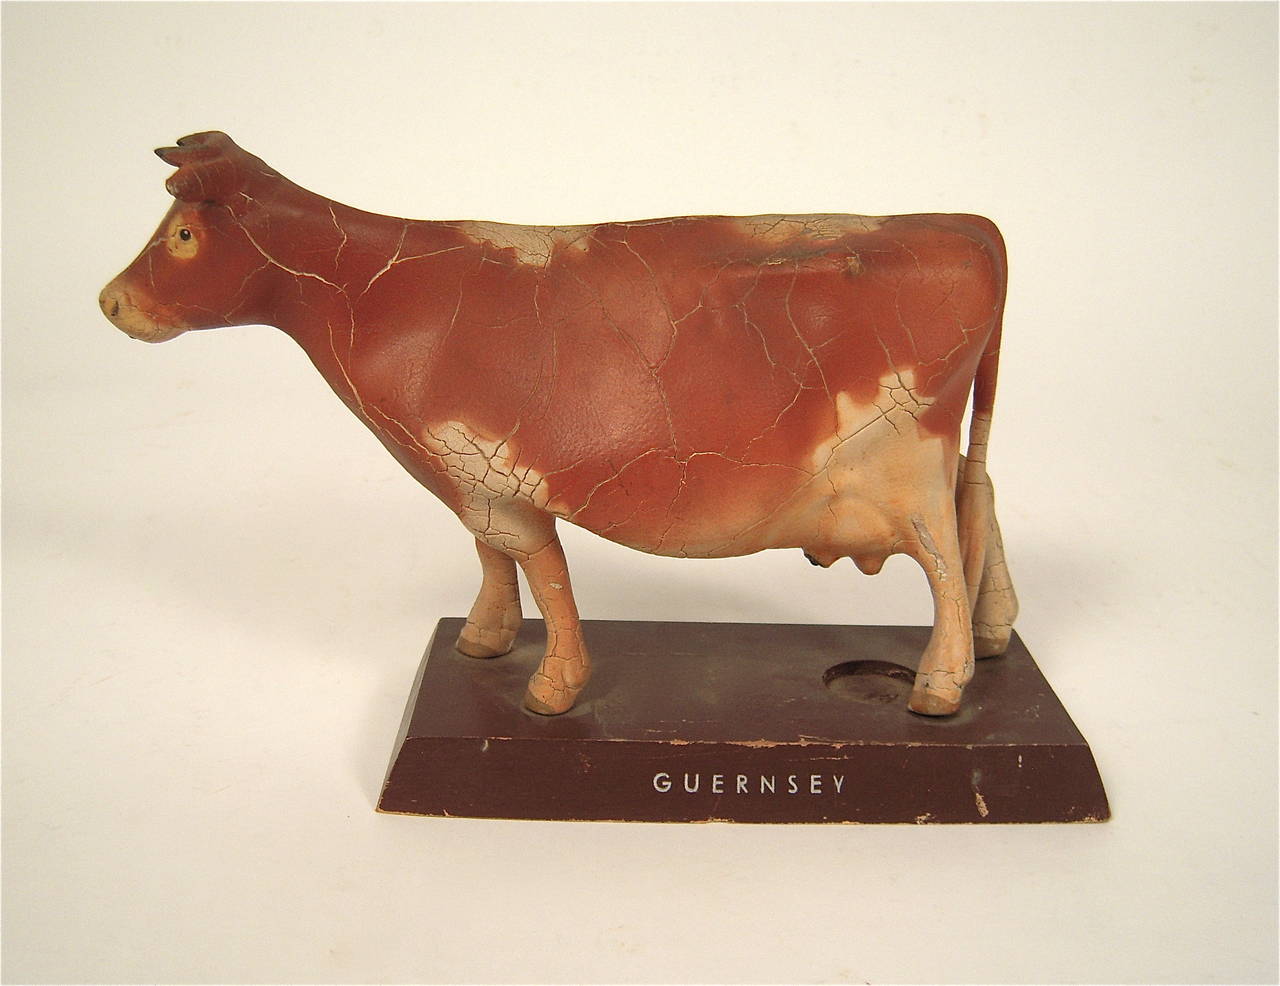 A German model (or toy) of a Guernsey cow, well modeled in painted plaster or cardboard (?), with an old, crackled leathery surface, on a painted wood plinth with 'Guernsey' stenciled in silver letters on it. 'Made in Germany' stamped on base. There